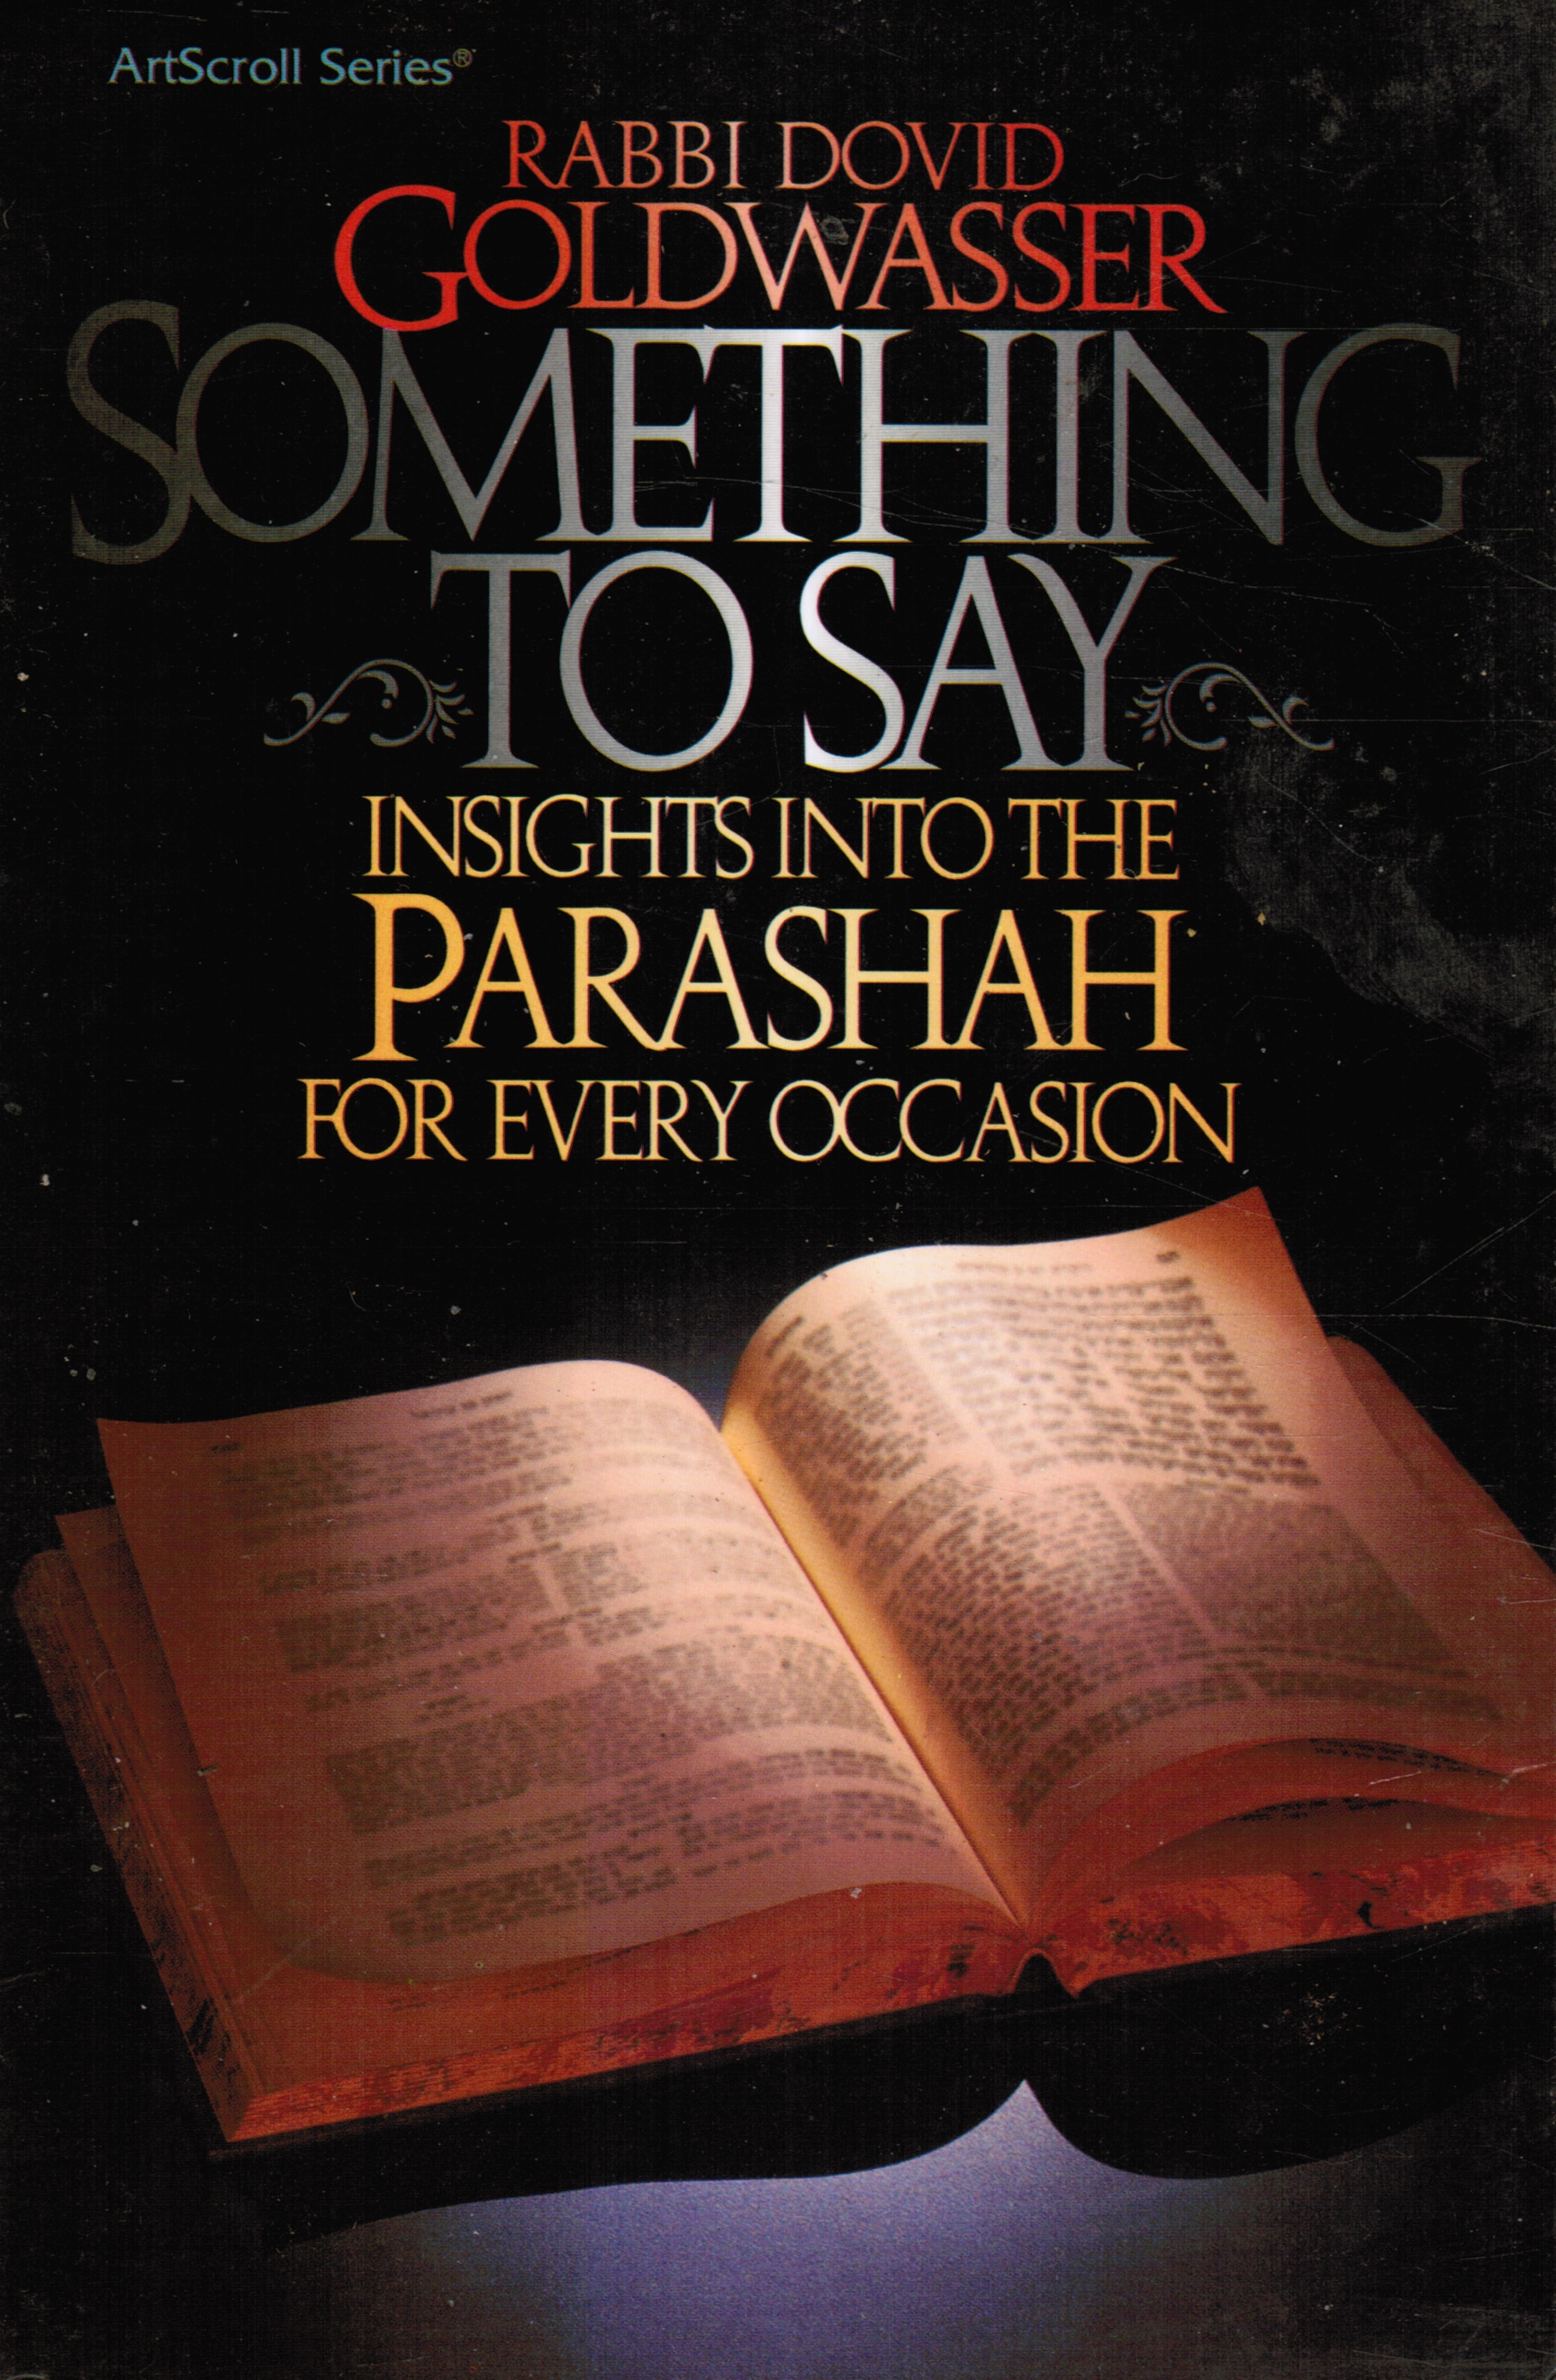 GOLDWASSER, RABBI DOVID - Something to Say - Insights Into the Parashah for Every Occasion